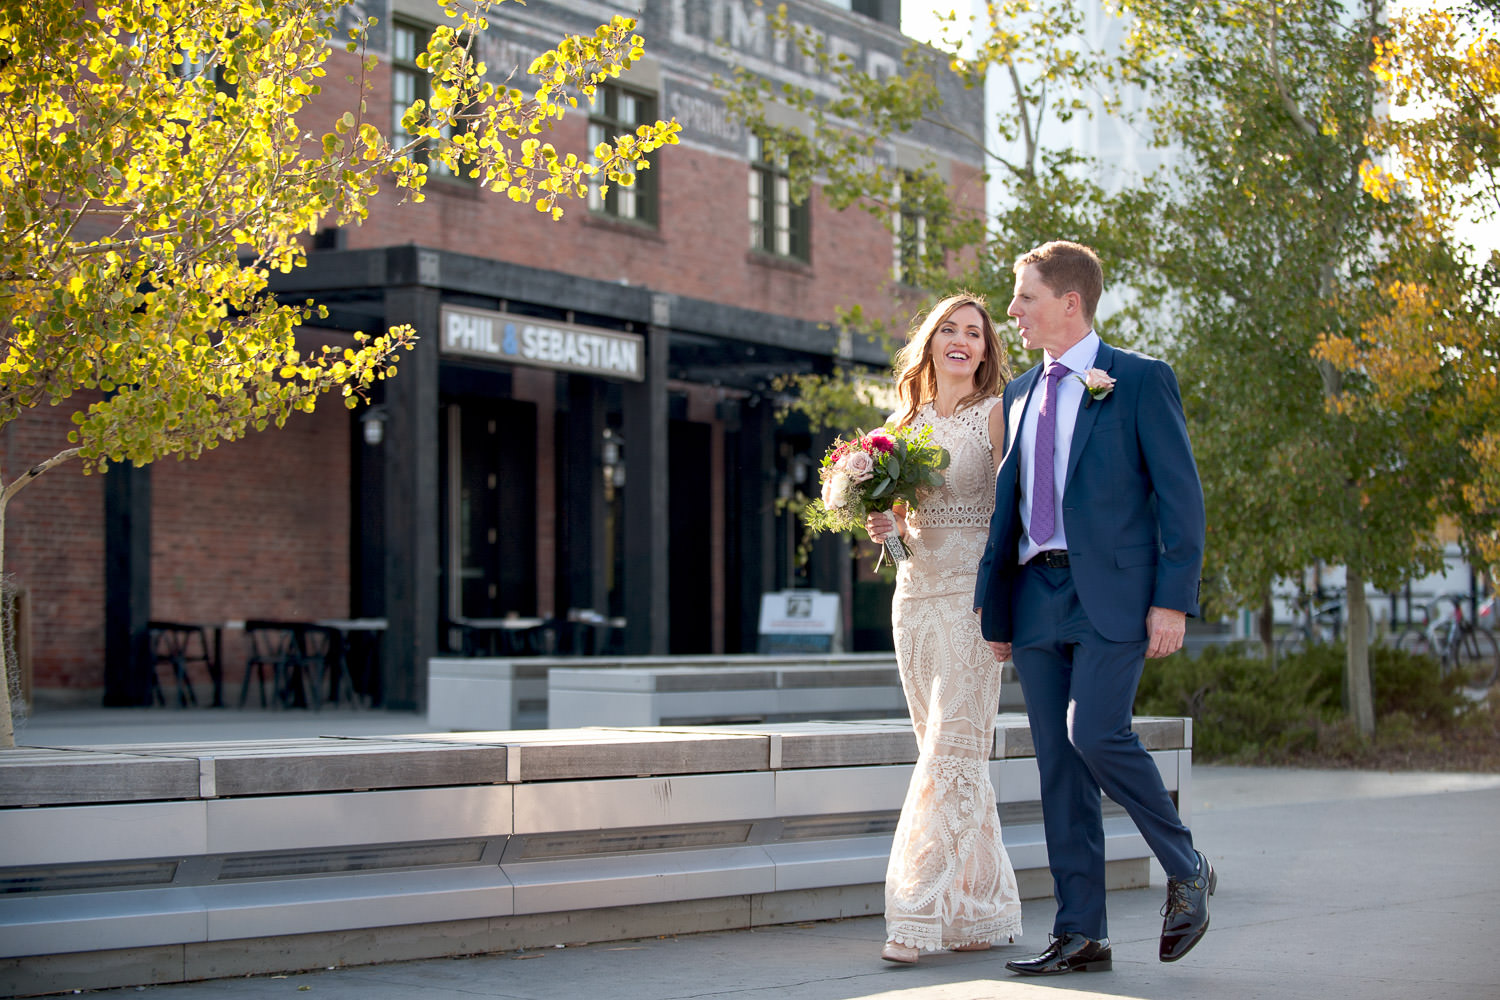 Unique wedding venues in Calgary captured by Tara Whittaker Photography